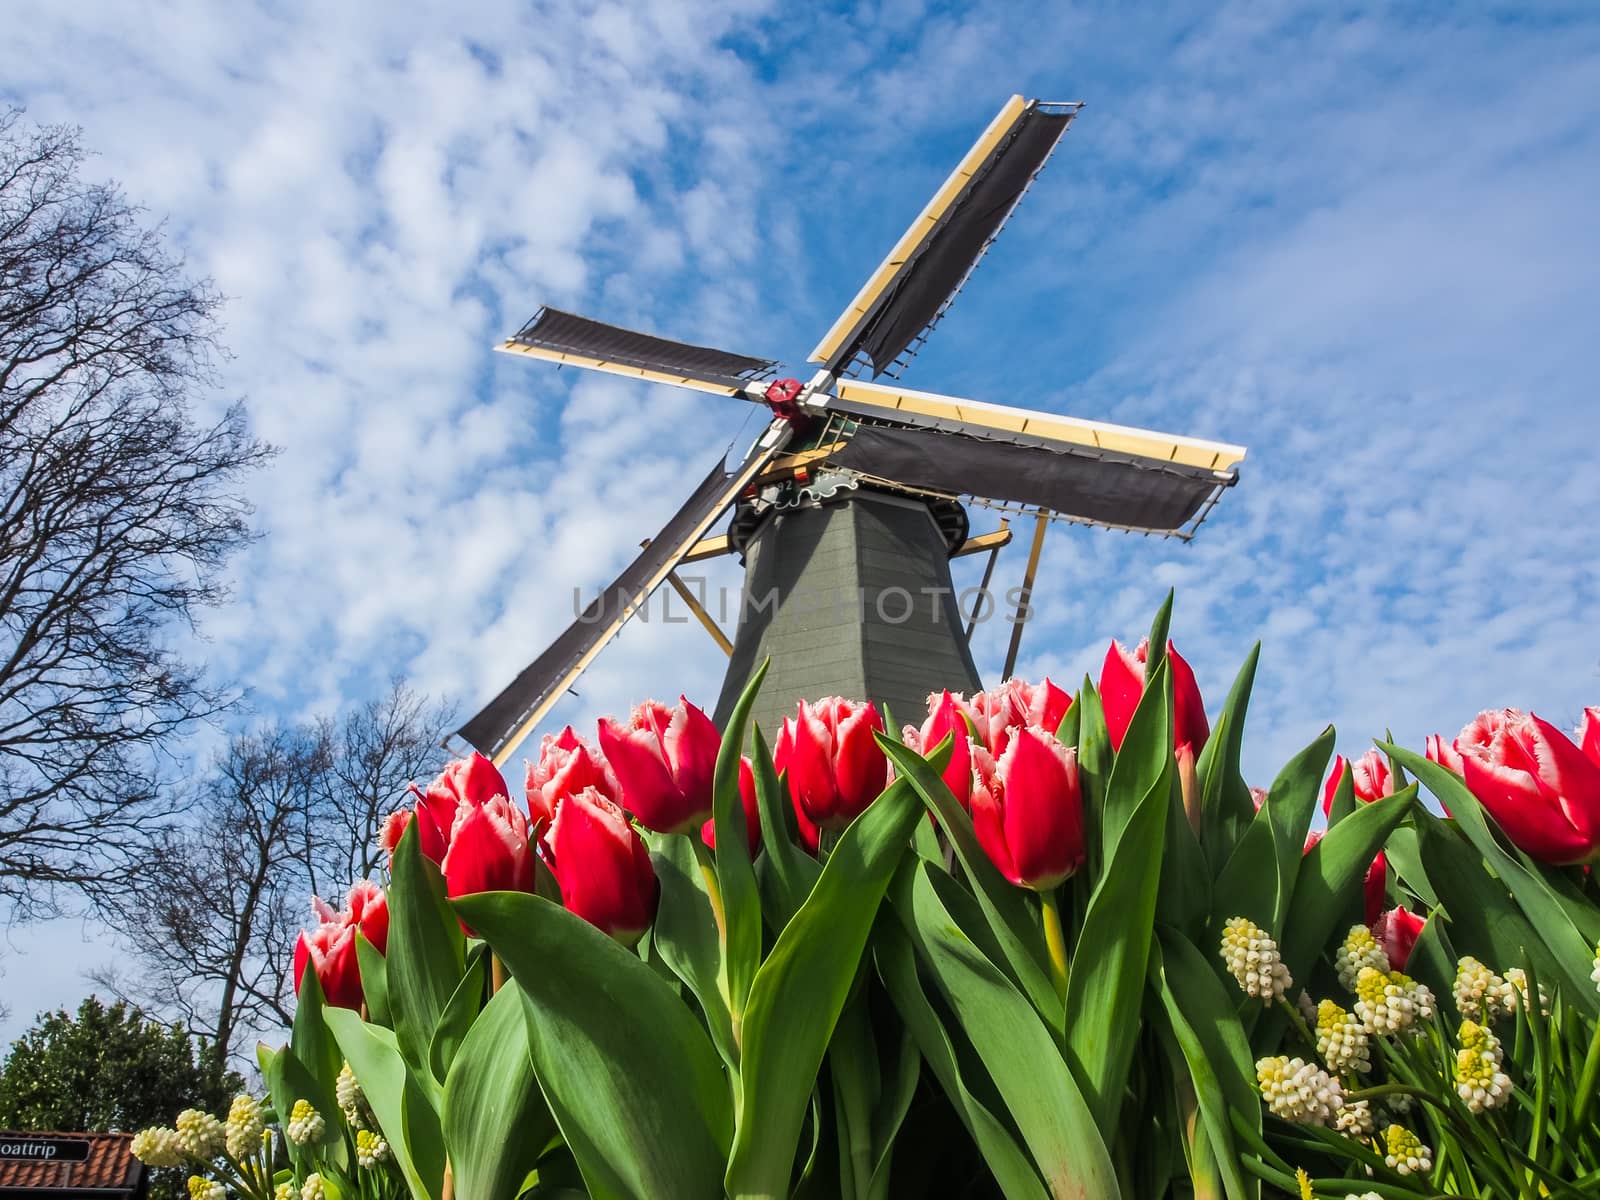 The famous Dutch windmills. View through red tulips by simpleBE